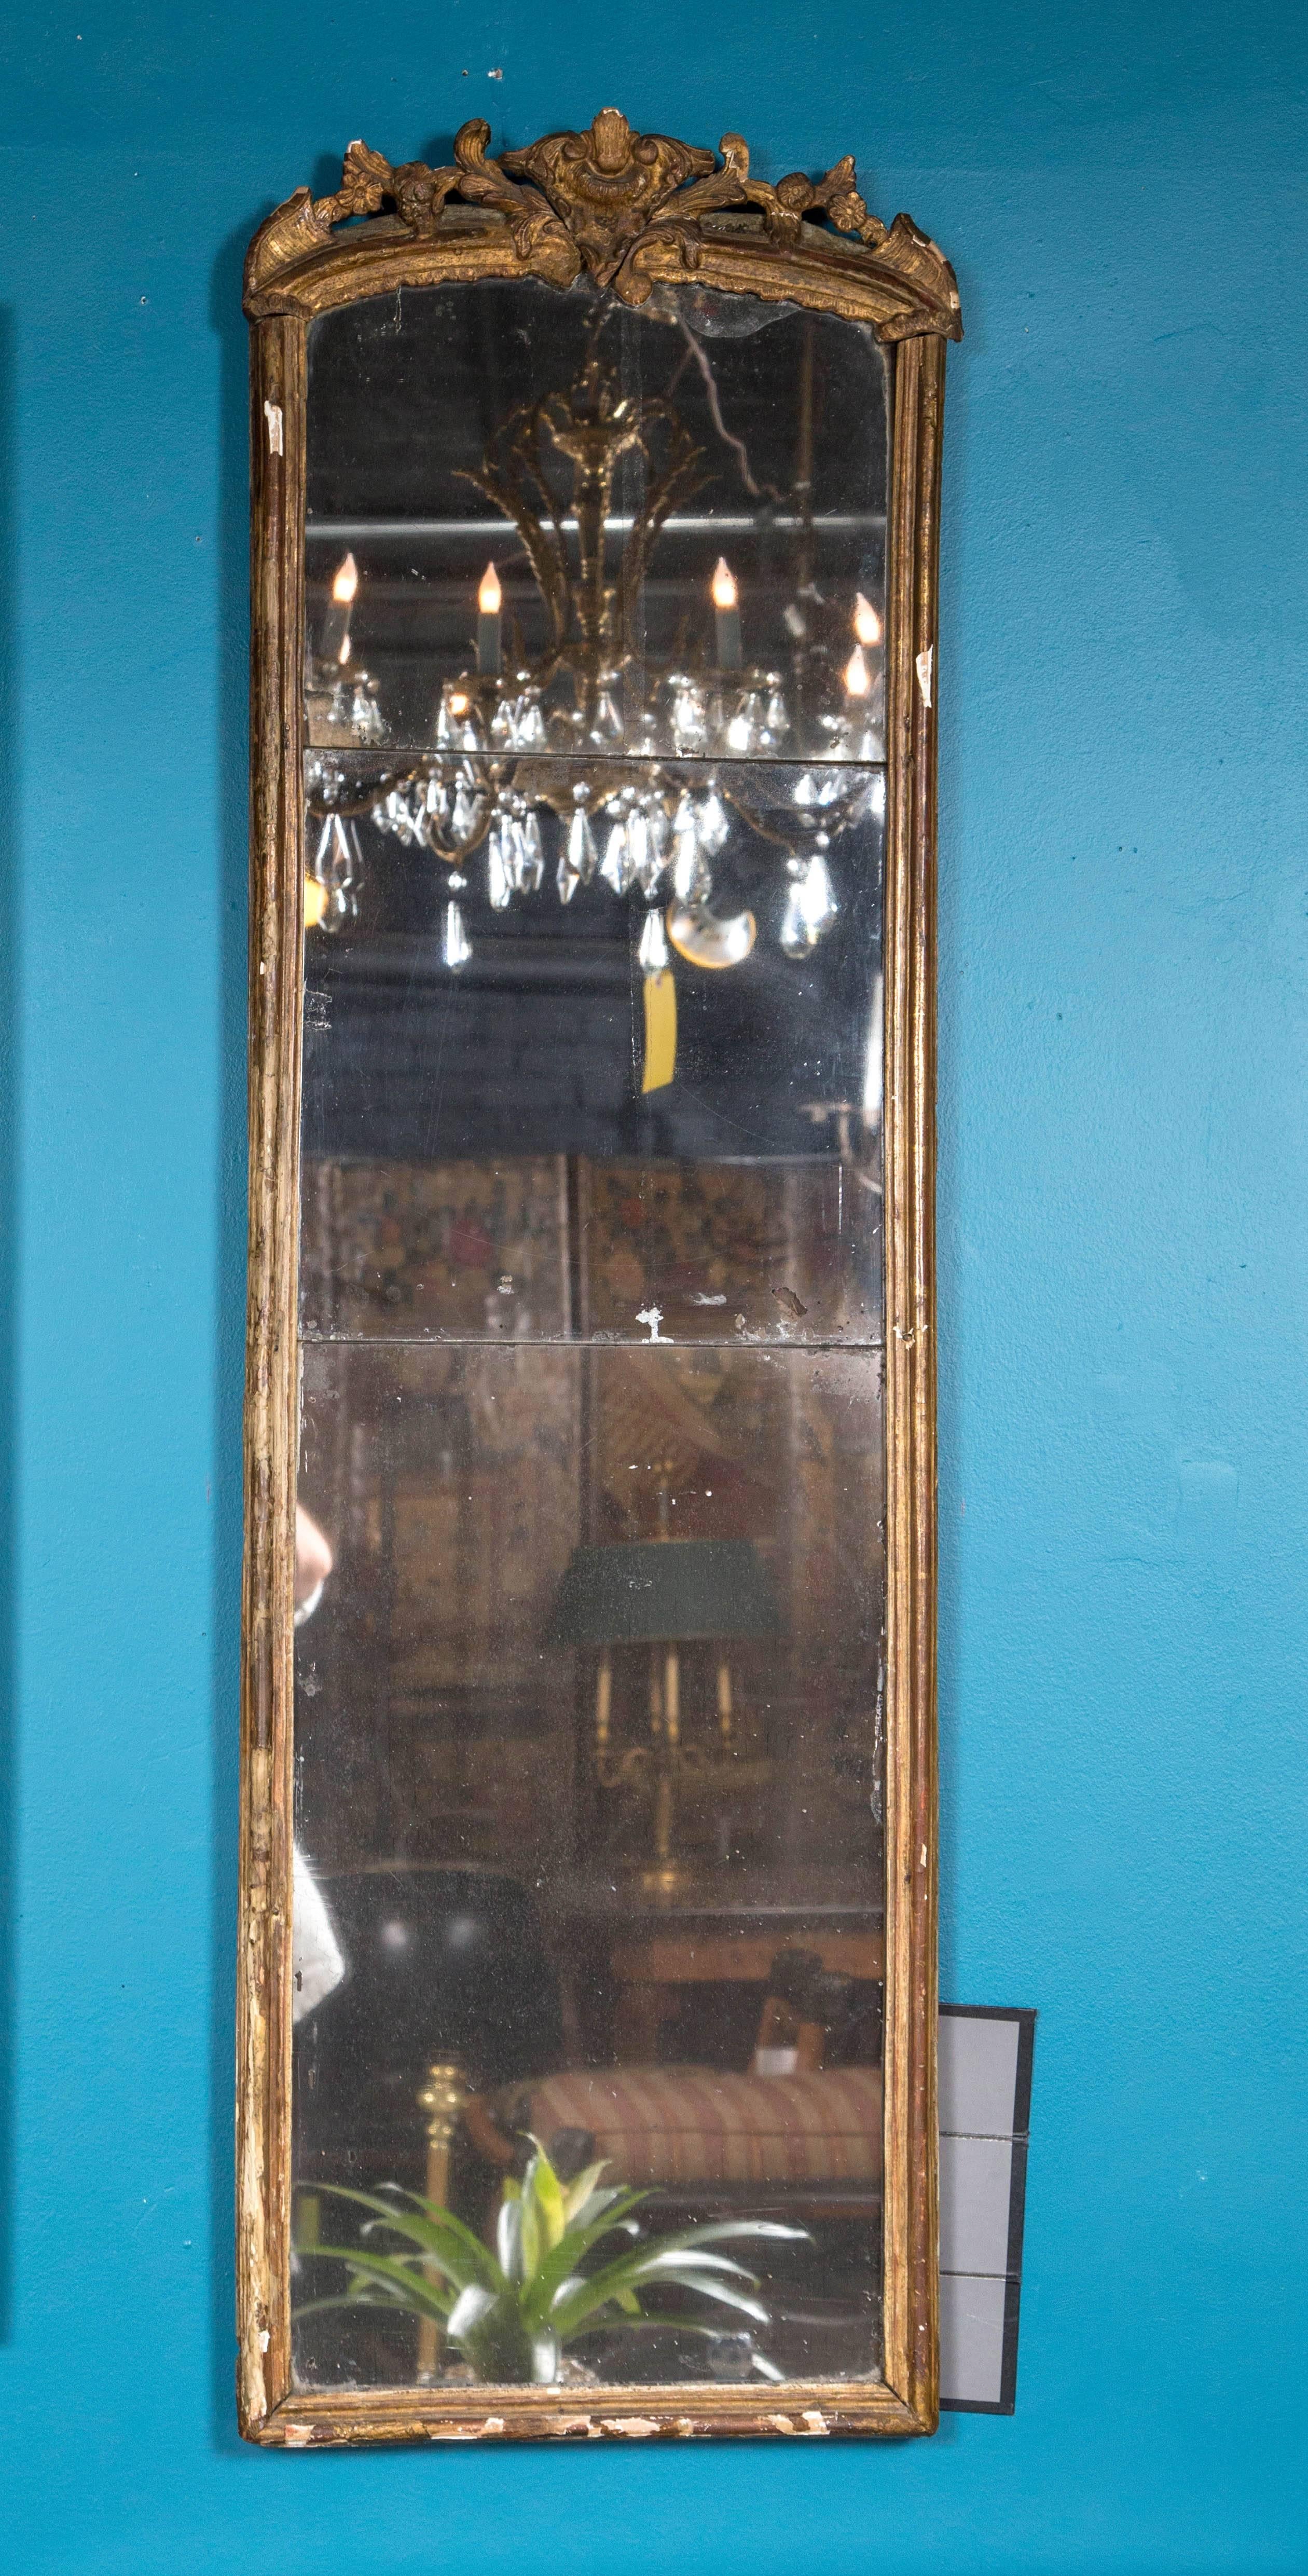 Antique three pane mirror in a gilded frame.